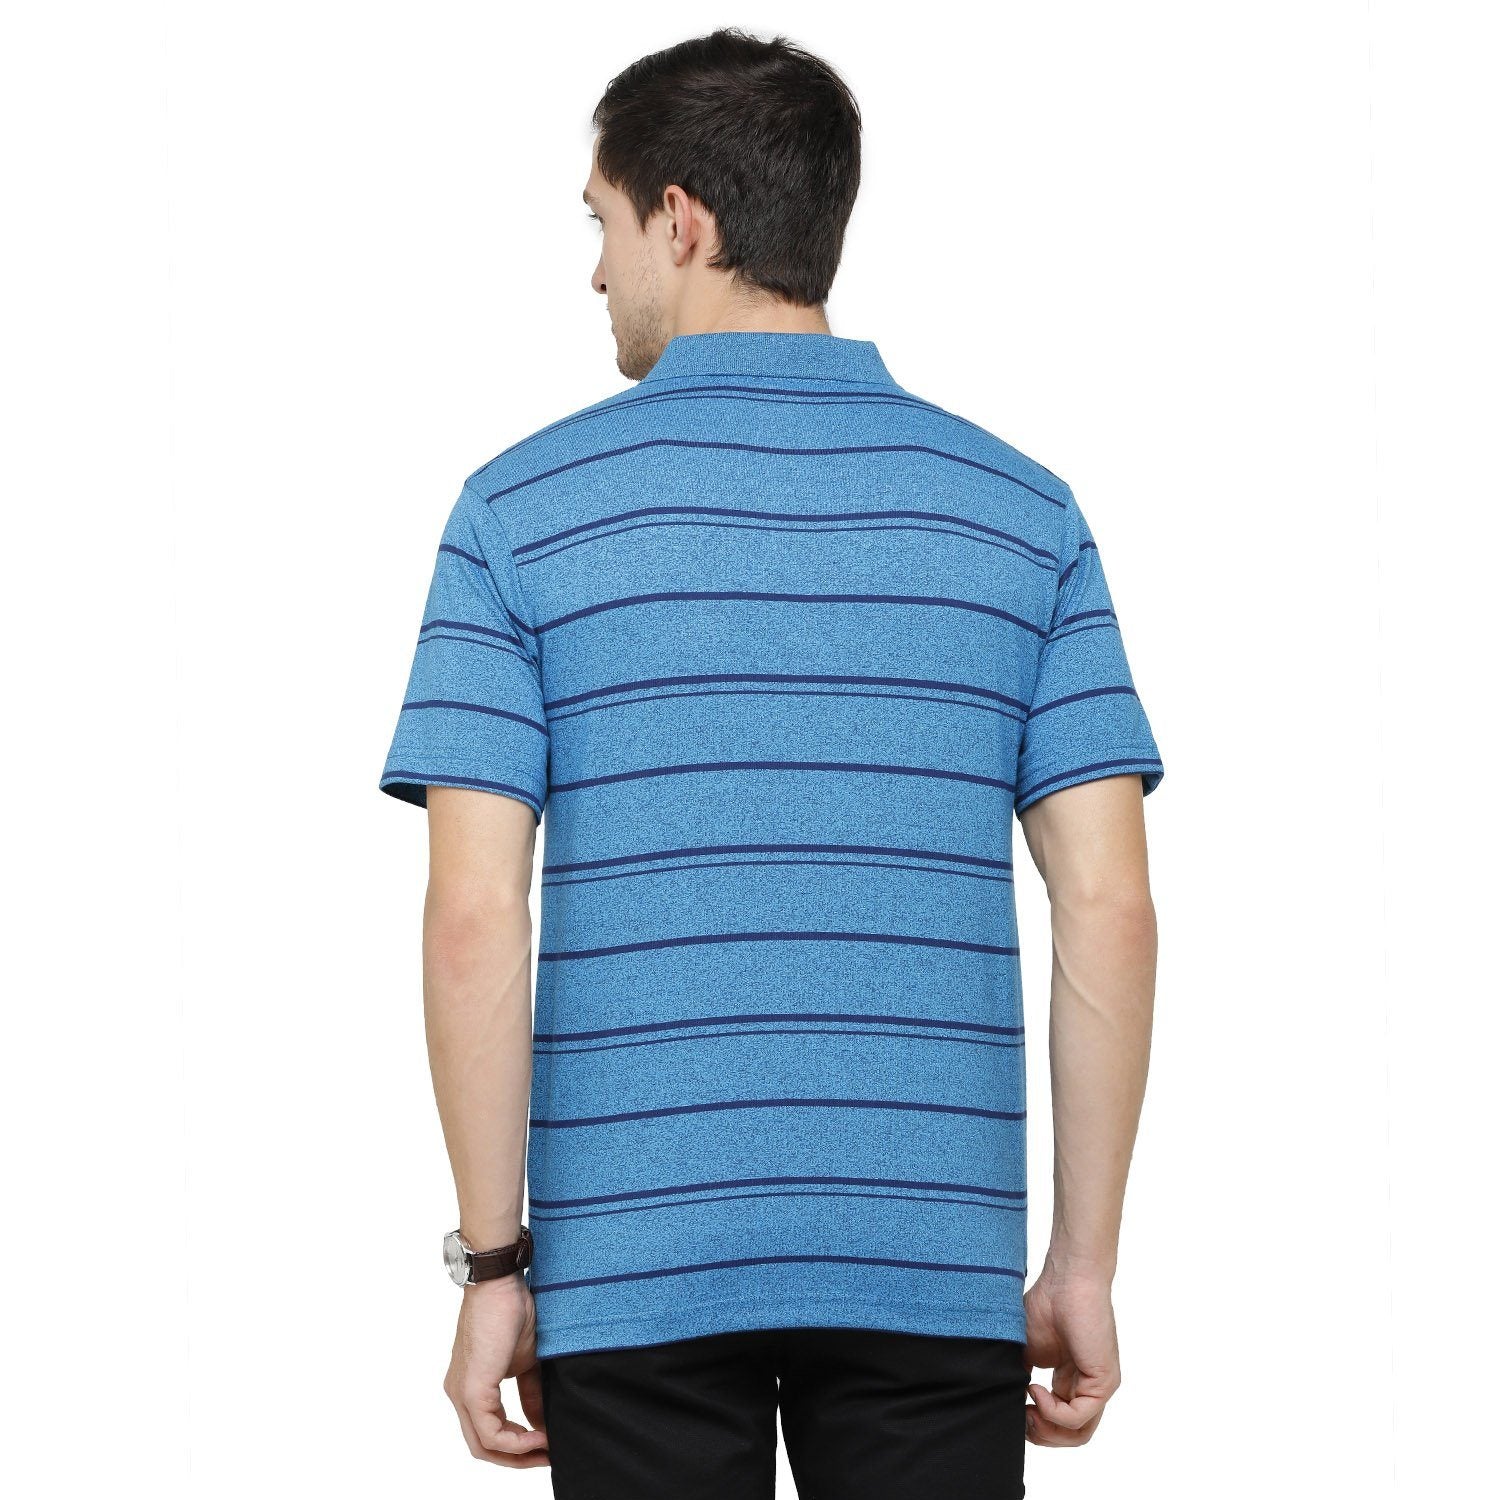 Classic Polo Mens Striped Polo Neck Half Sleeve Regular Fit Cotton Polyester Blend Turquoise Fashion T-Shirt ( AVON - 469 A AF P ) T-shirt Classic Polo 